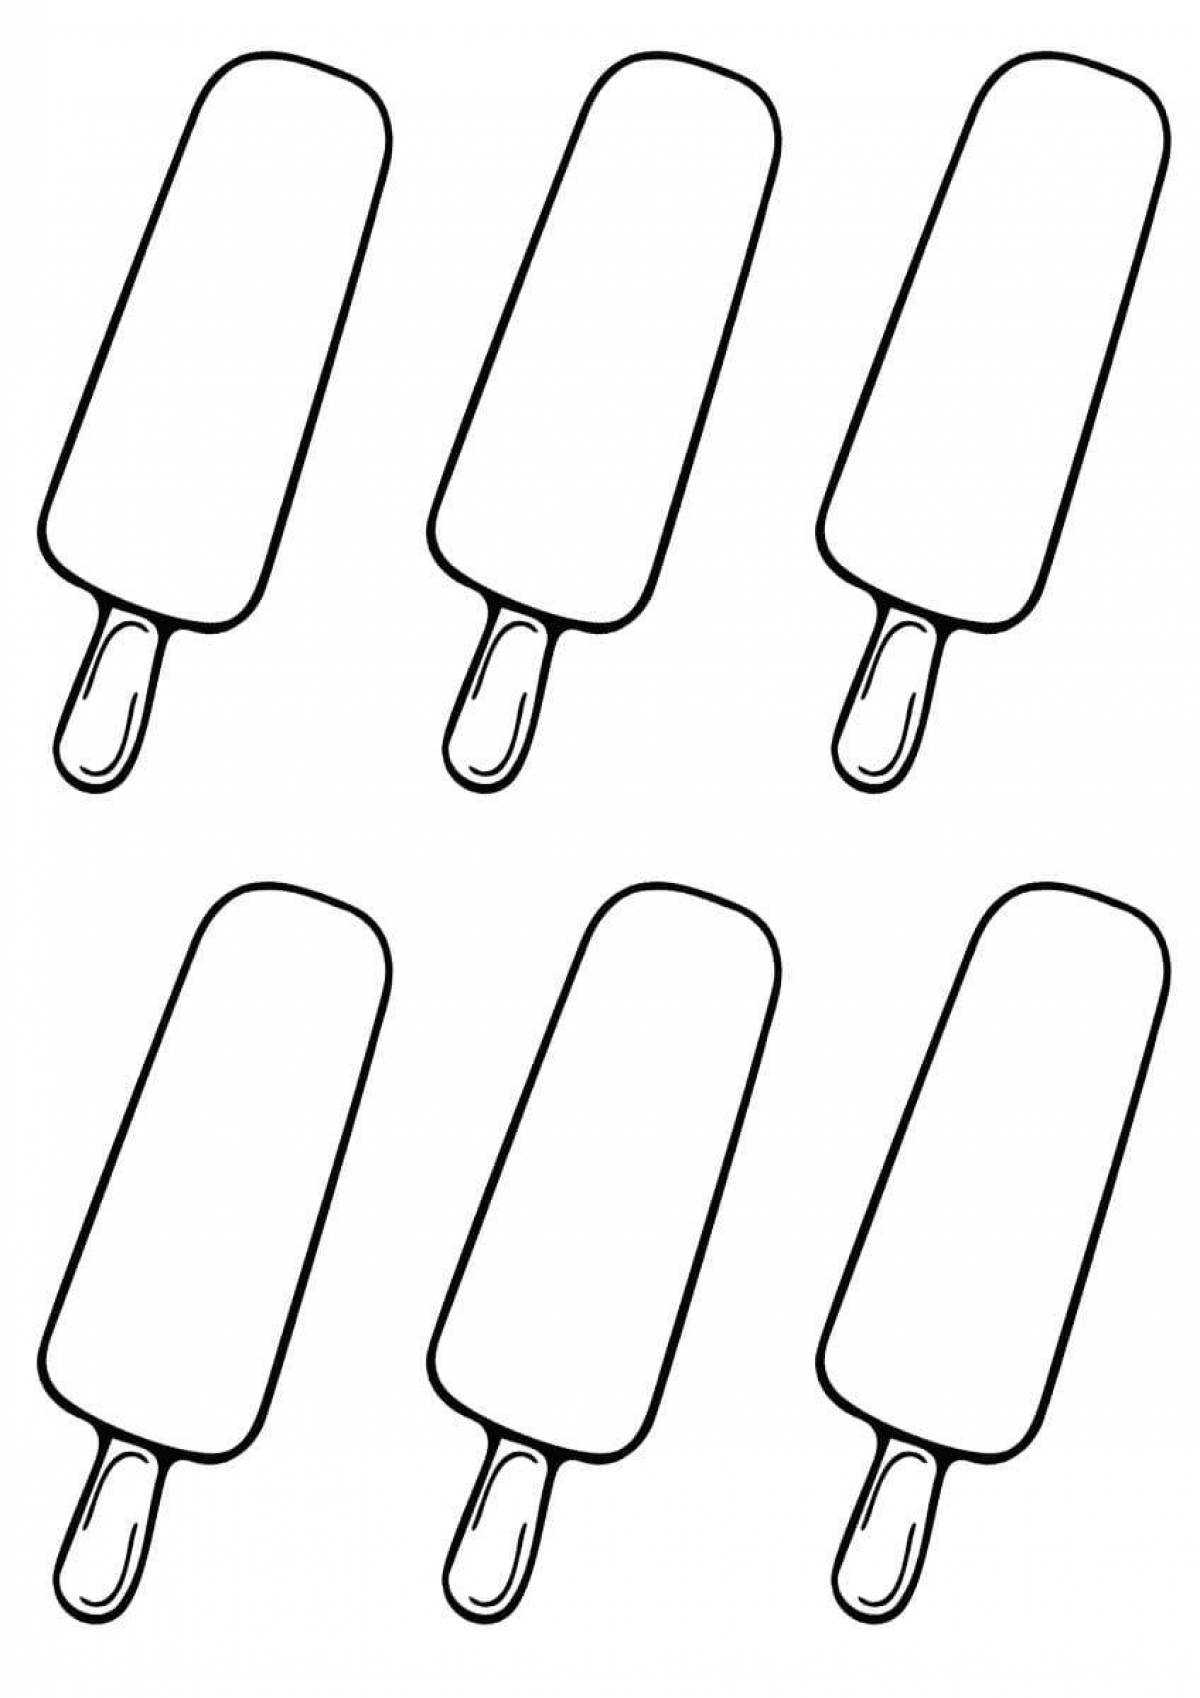 Colorful popsicle coloring book for kids